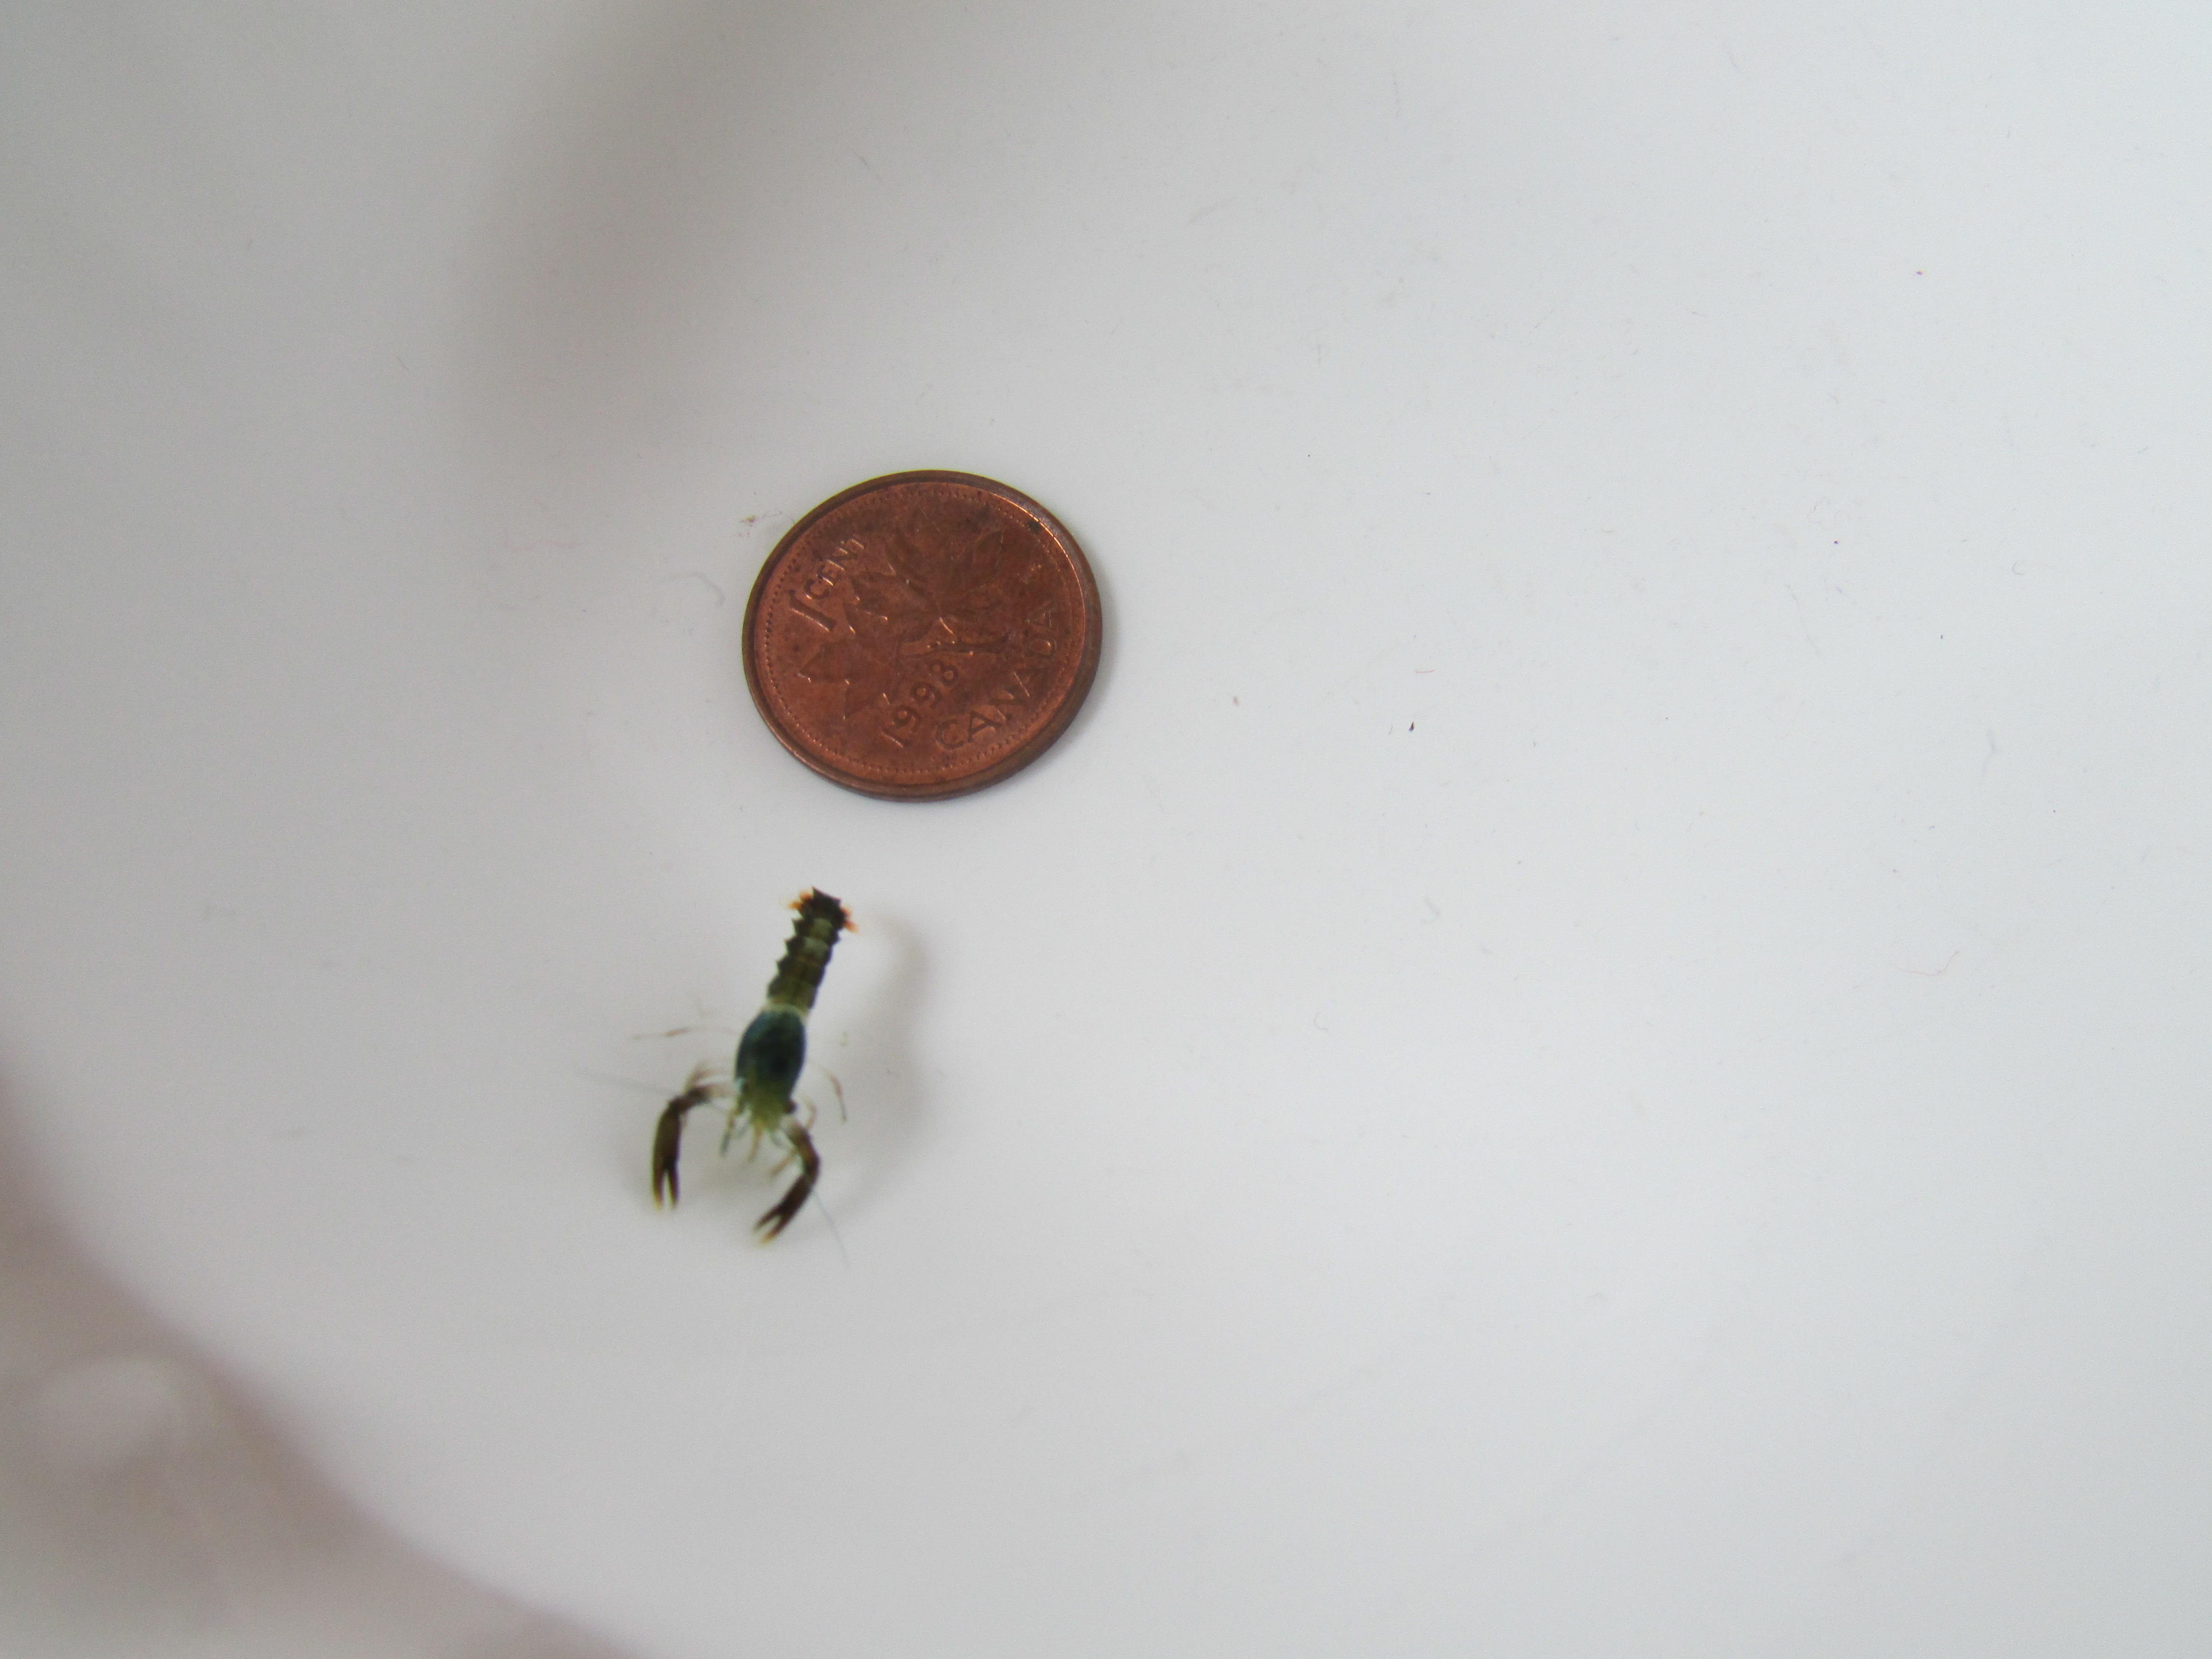 A larvae and a penny